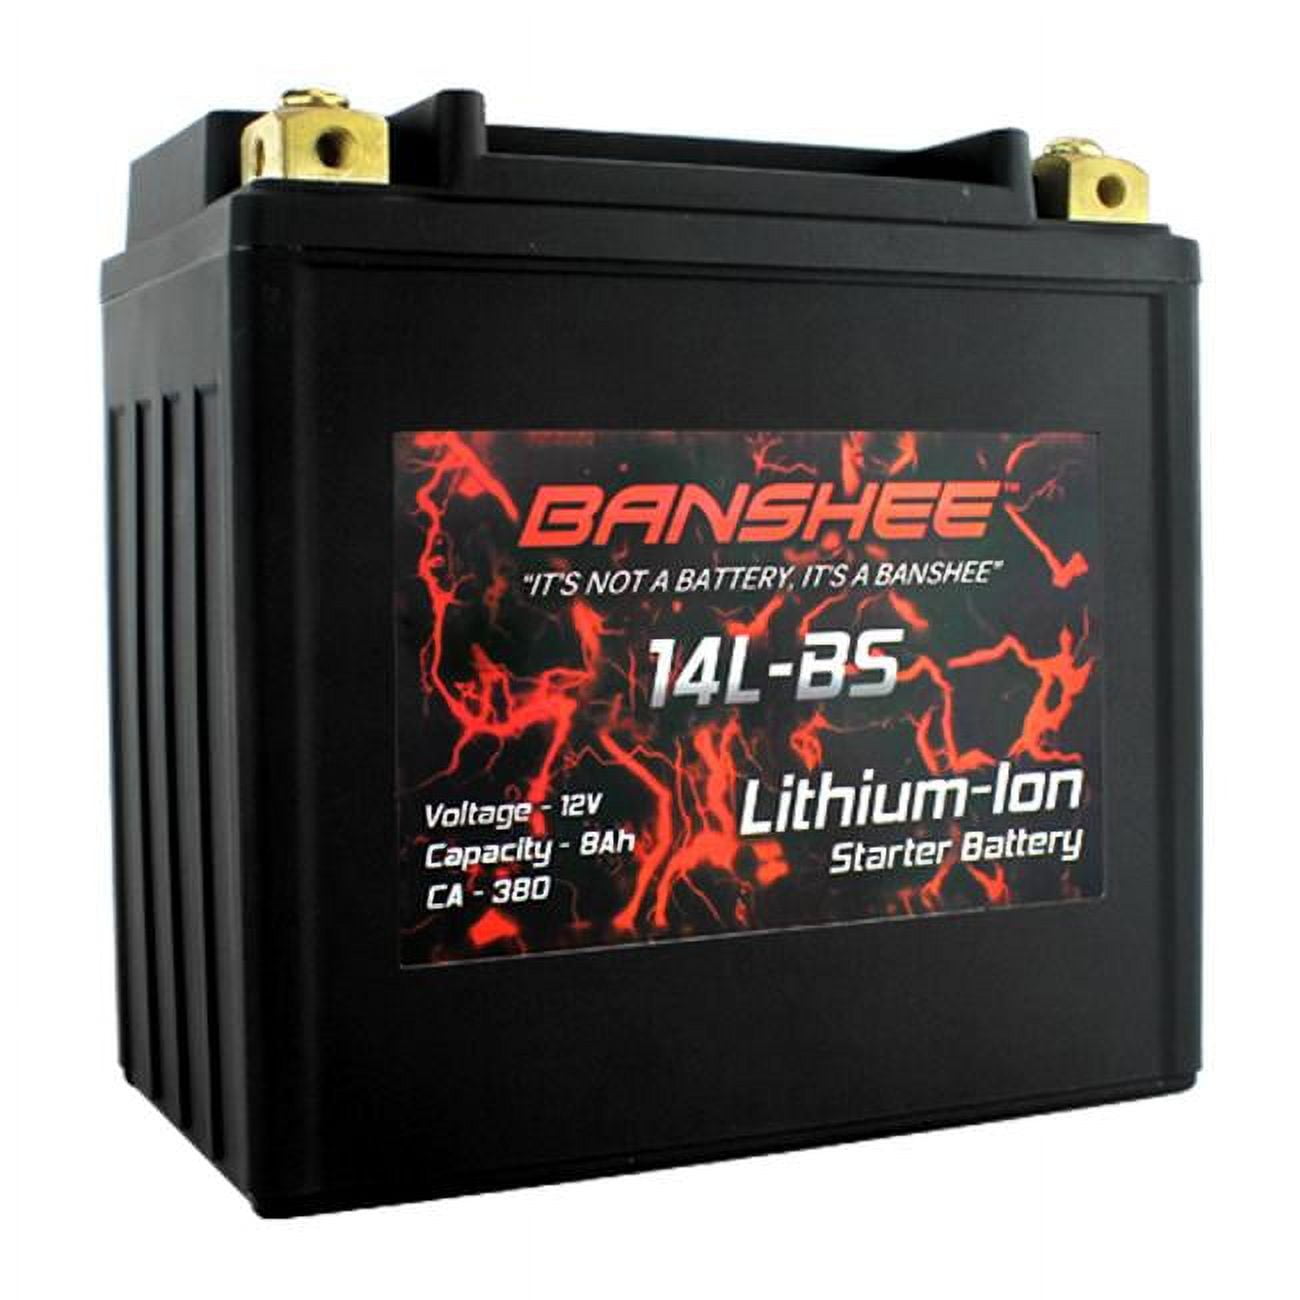 Picture of Banshee DLFP14L-BS Lithium-Ion Motorcycle Battery Replaces 65958-04